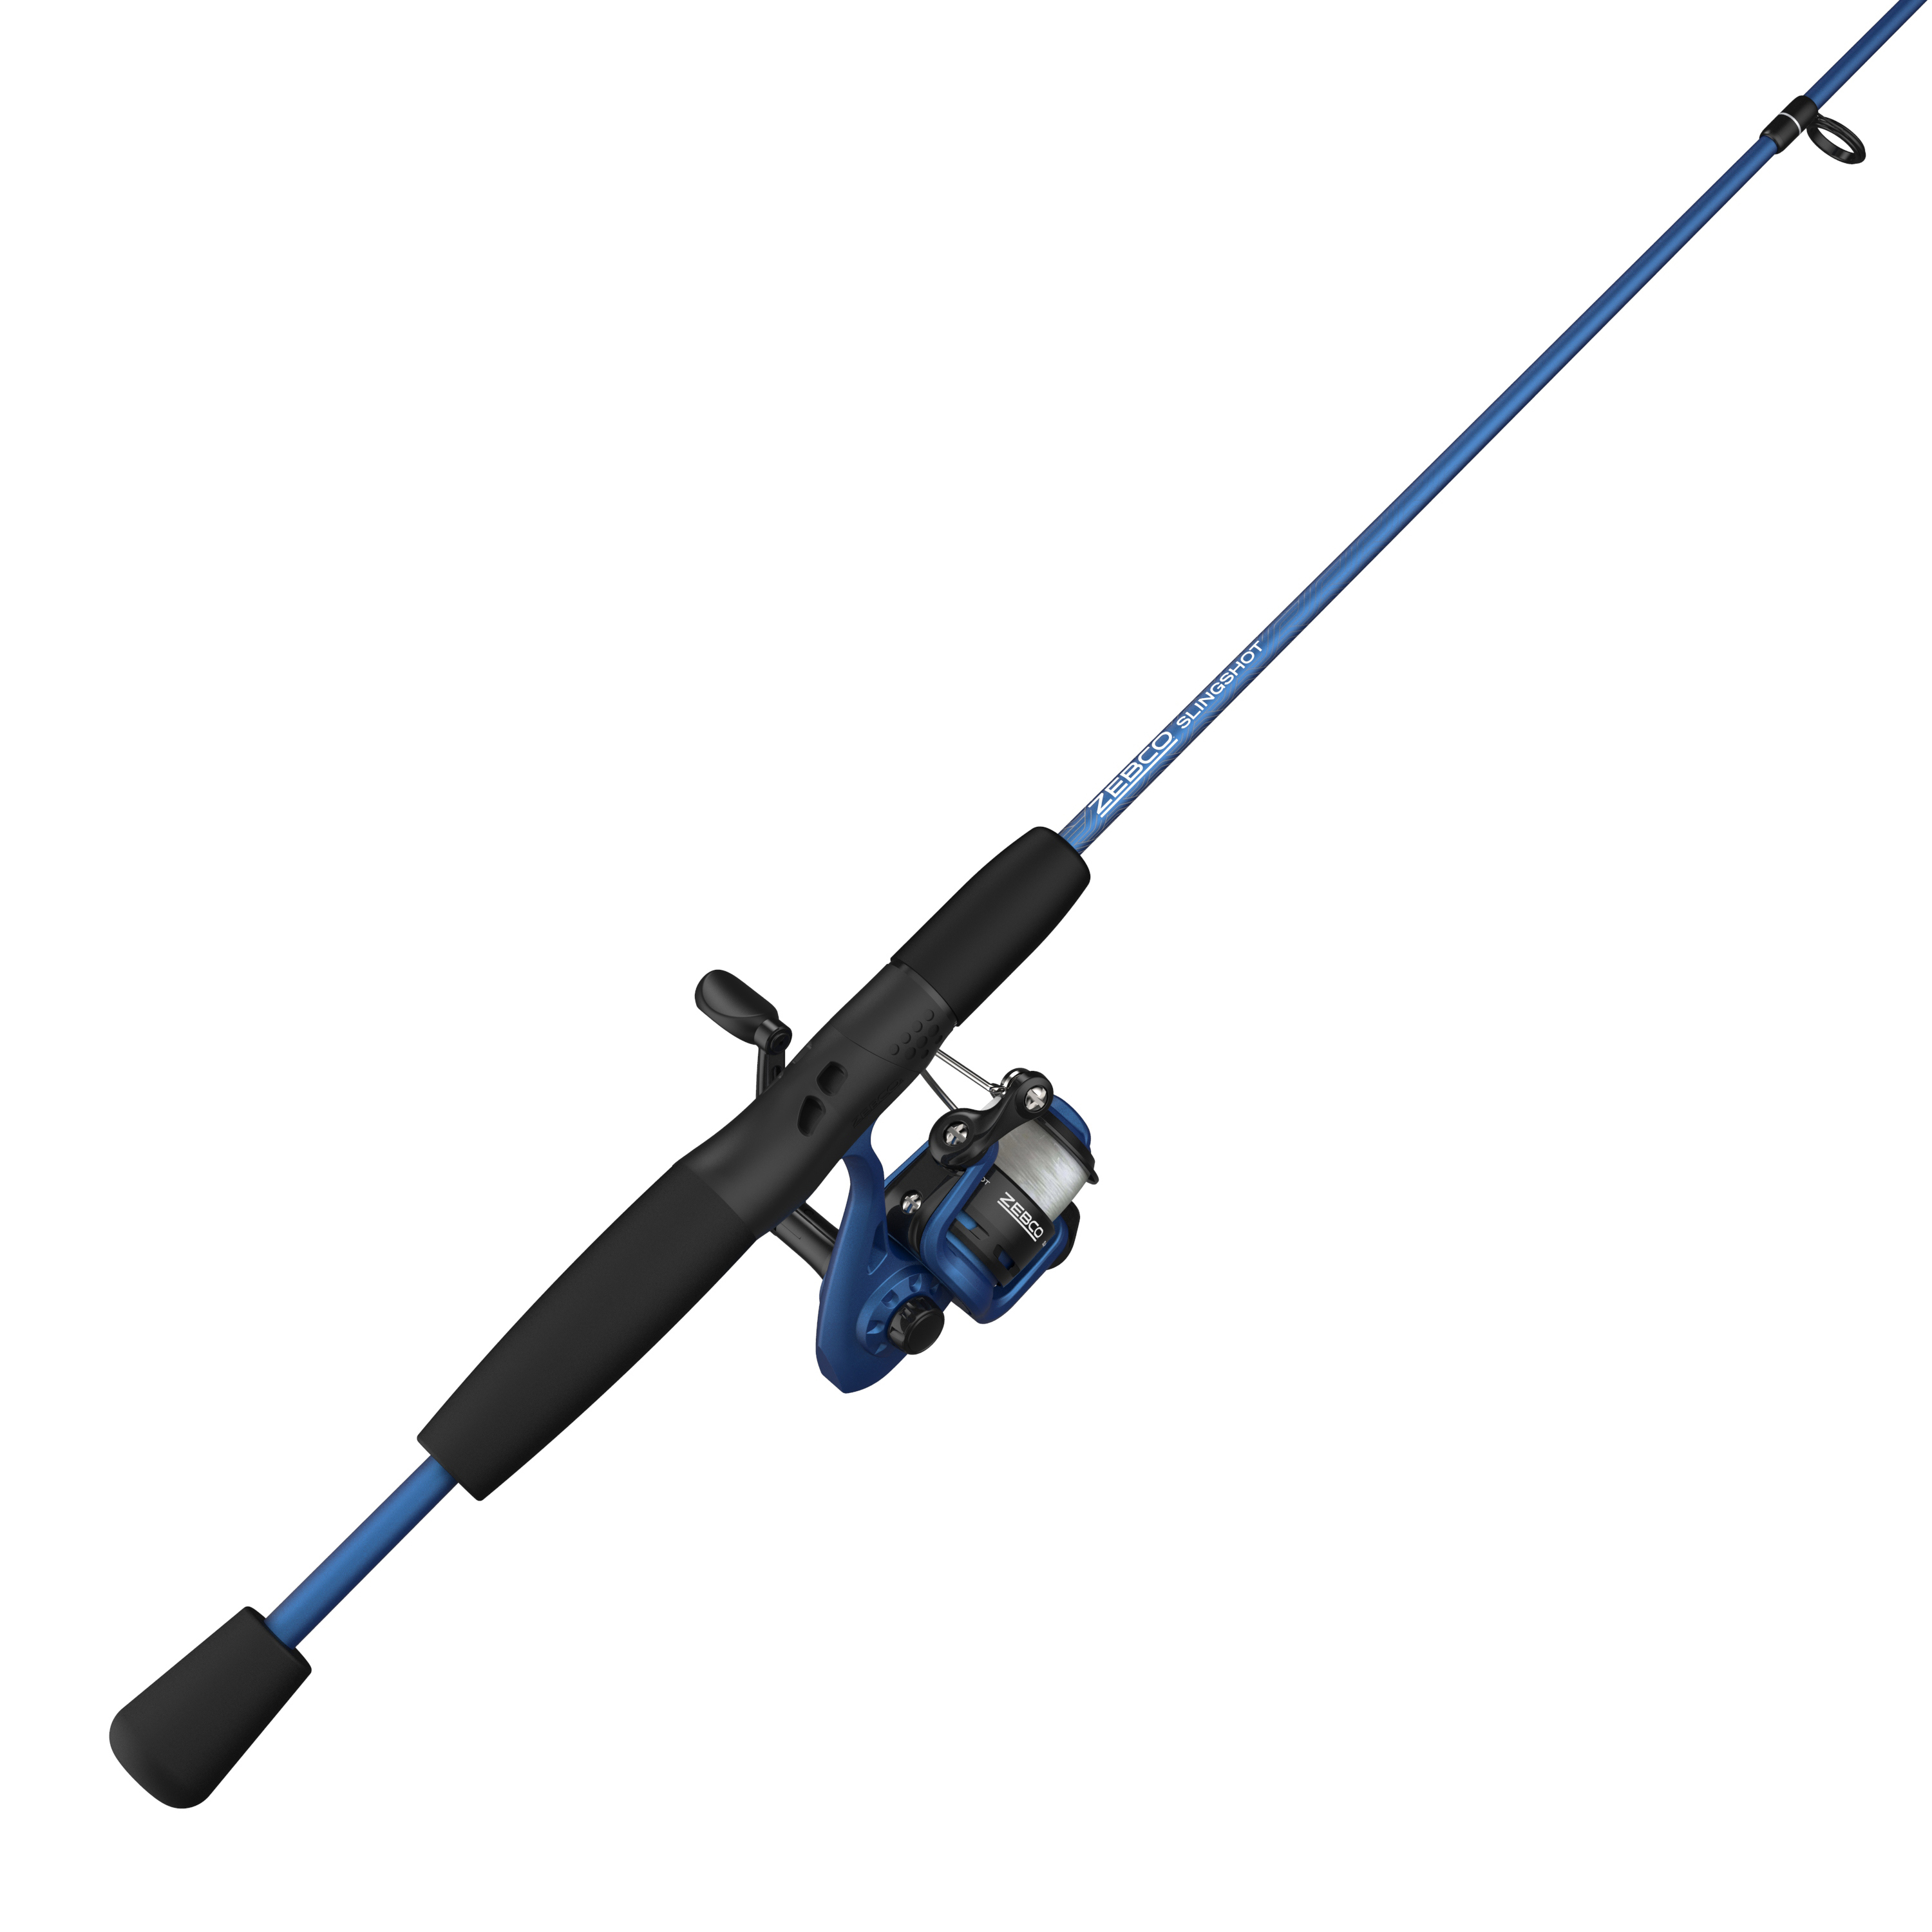 Zebco 202 Spincast Reel and Fishing Rod Combo, 5-Foot 6-Inch 2-Piece  Fishing Pole